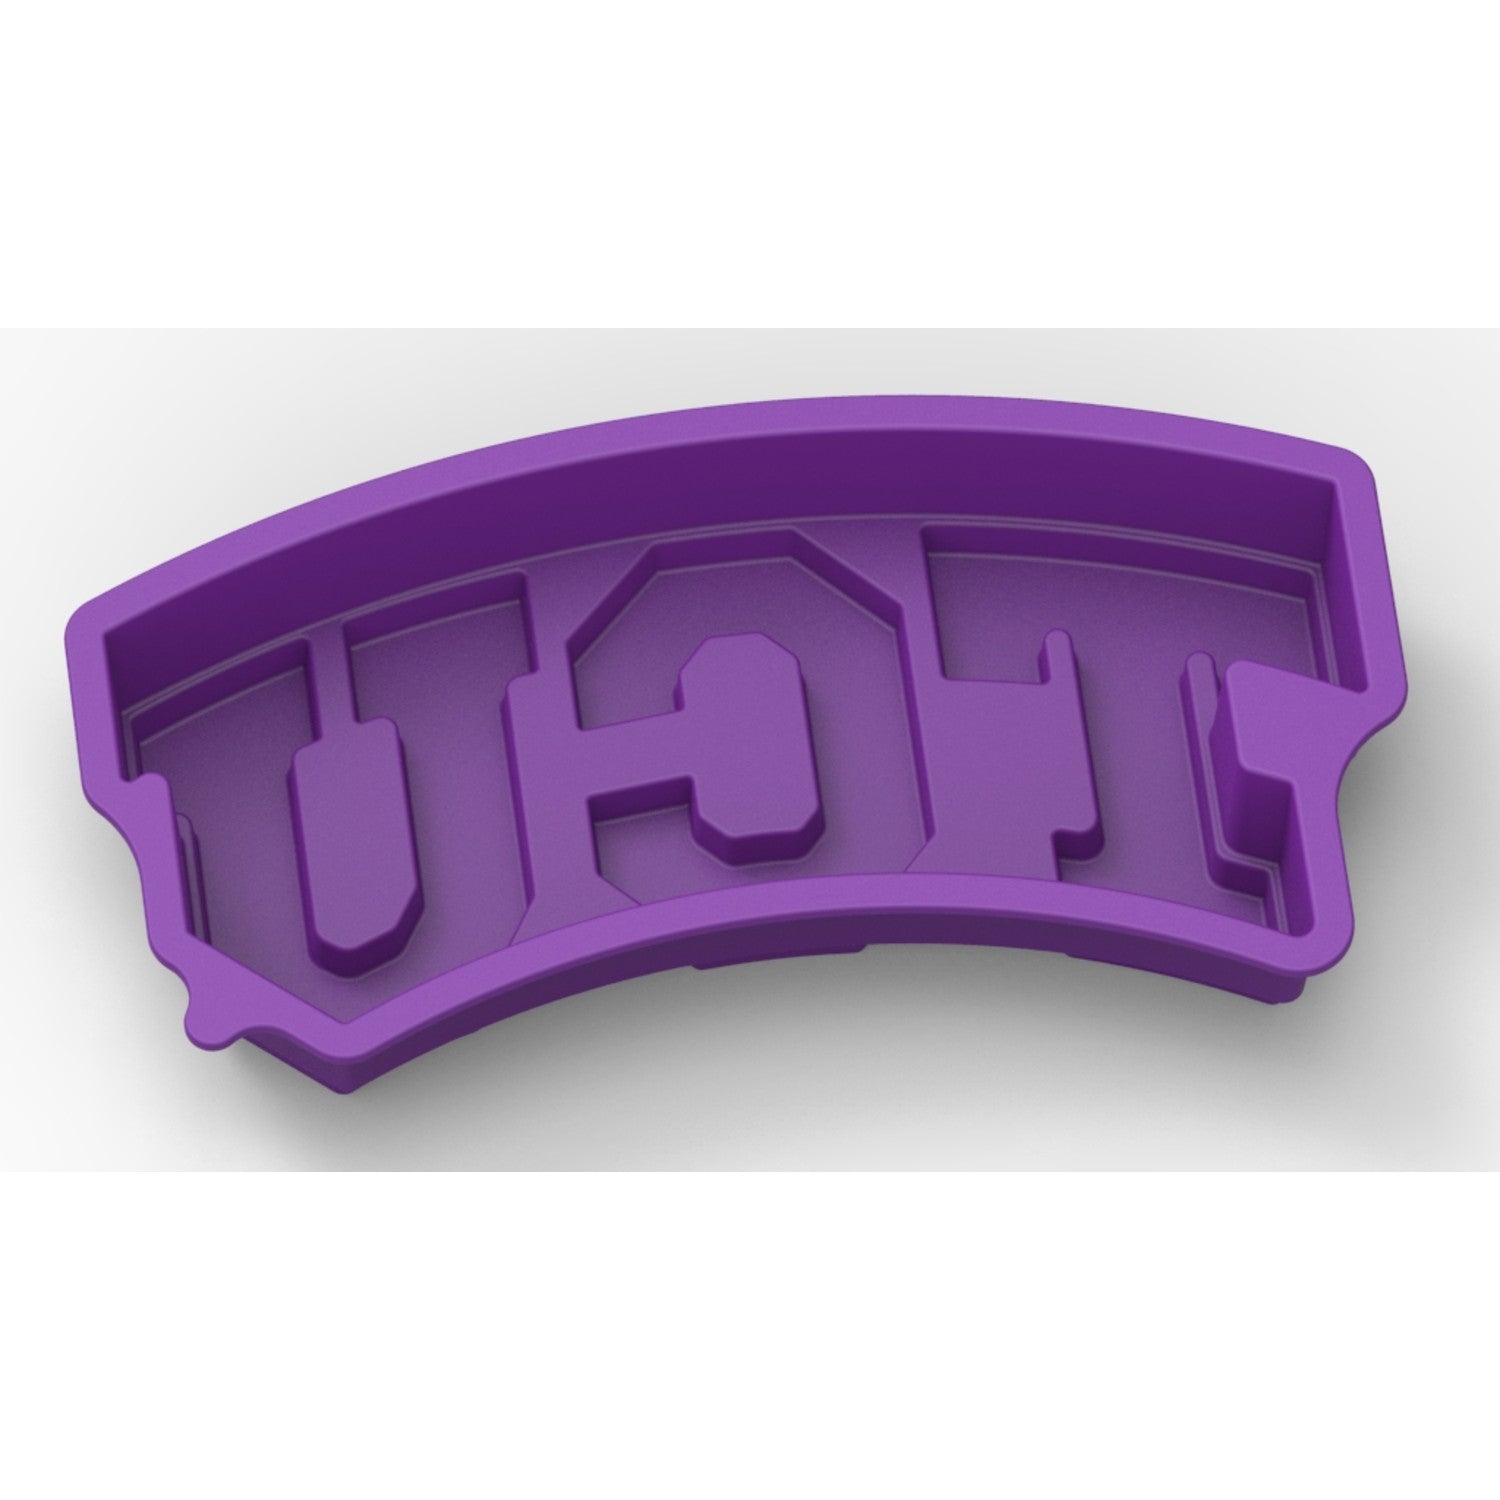 TCU Horned Frogs Cake Pan | MasterPieces – MasterPieces Puzzle Company INC